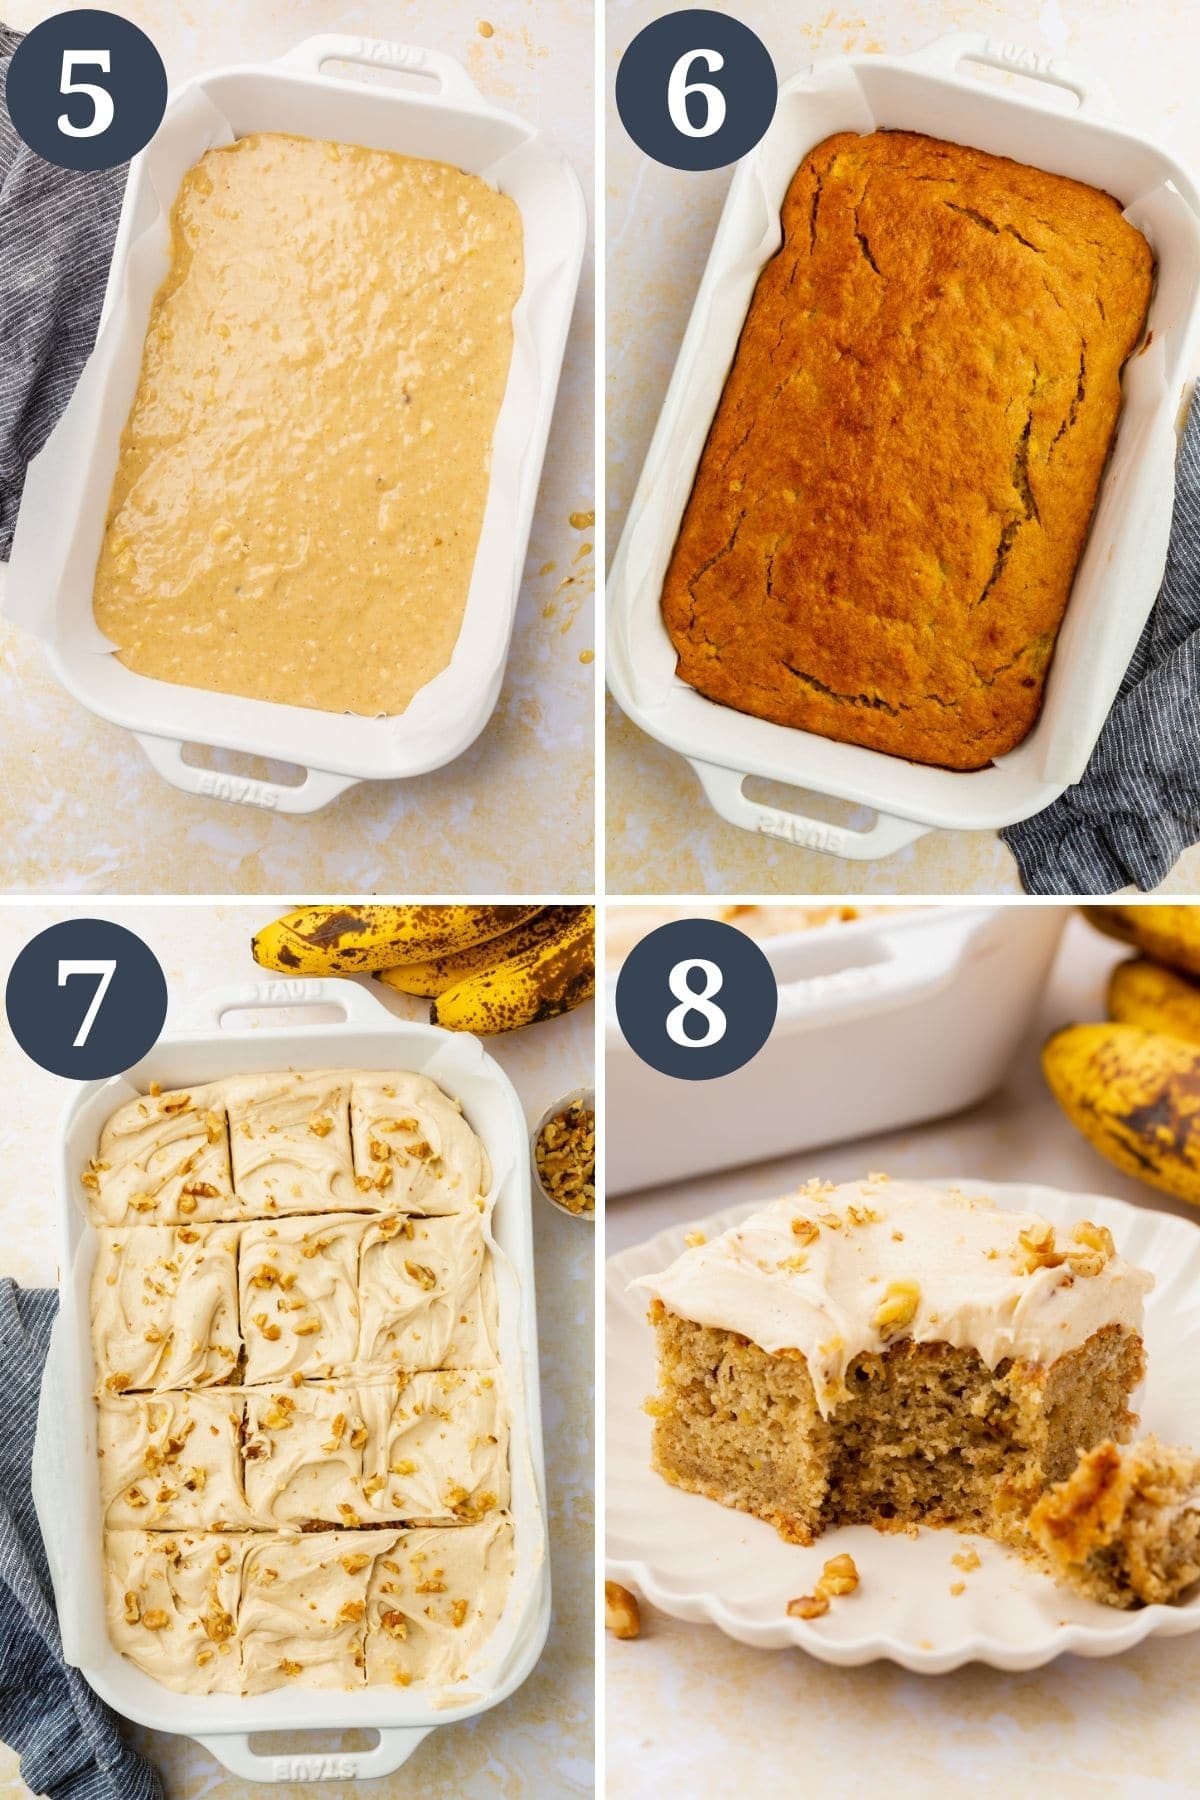 Collage showing steps for baking a banana cake and frosting with cream cheese frosting.